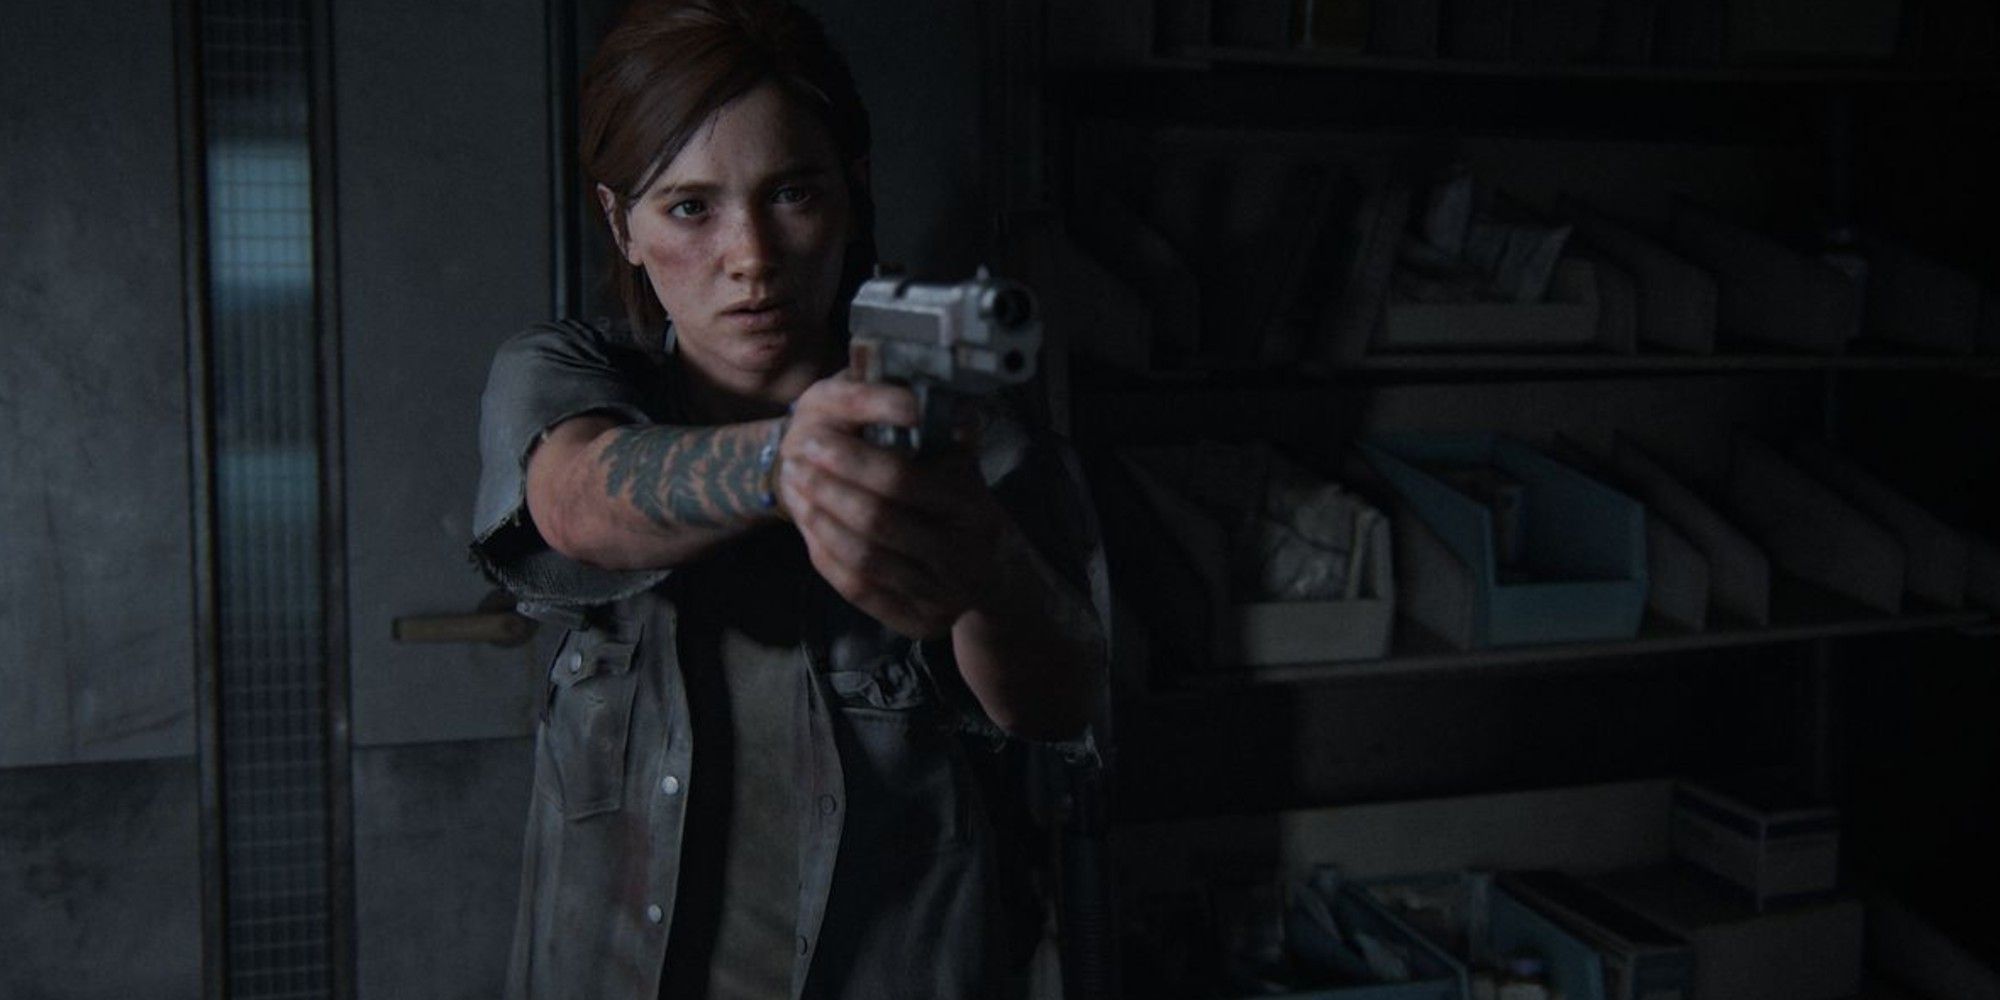 How to Find The Handgun Holsters in The Last of Us 2